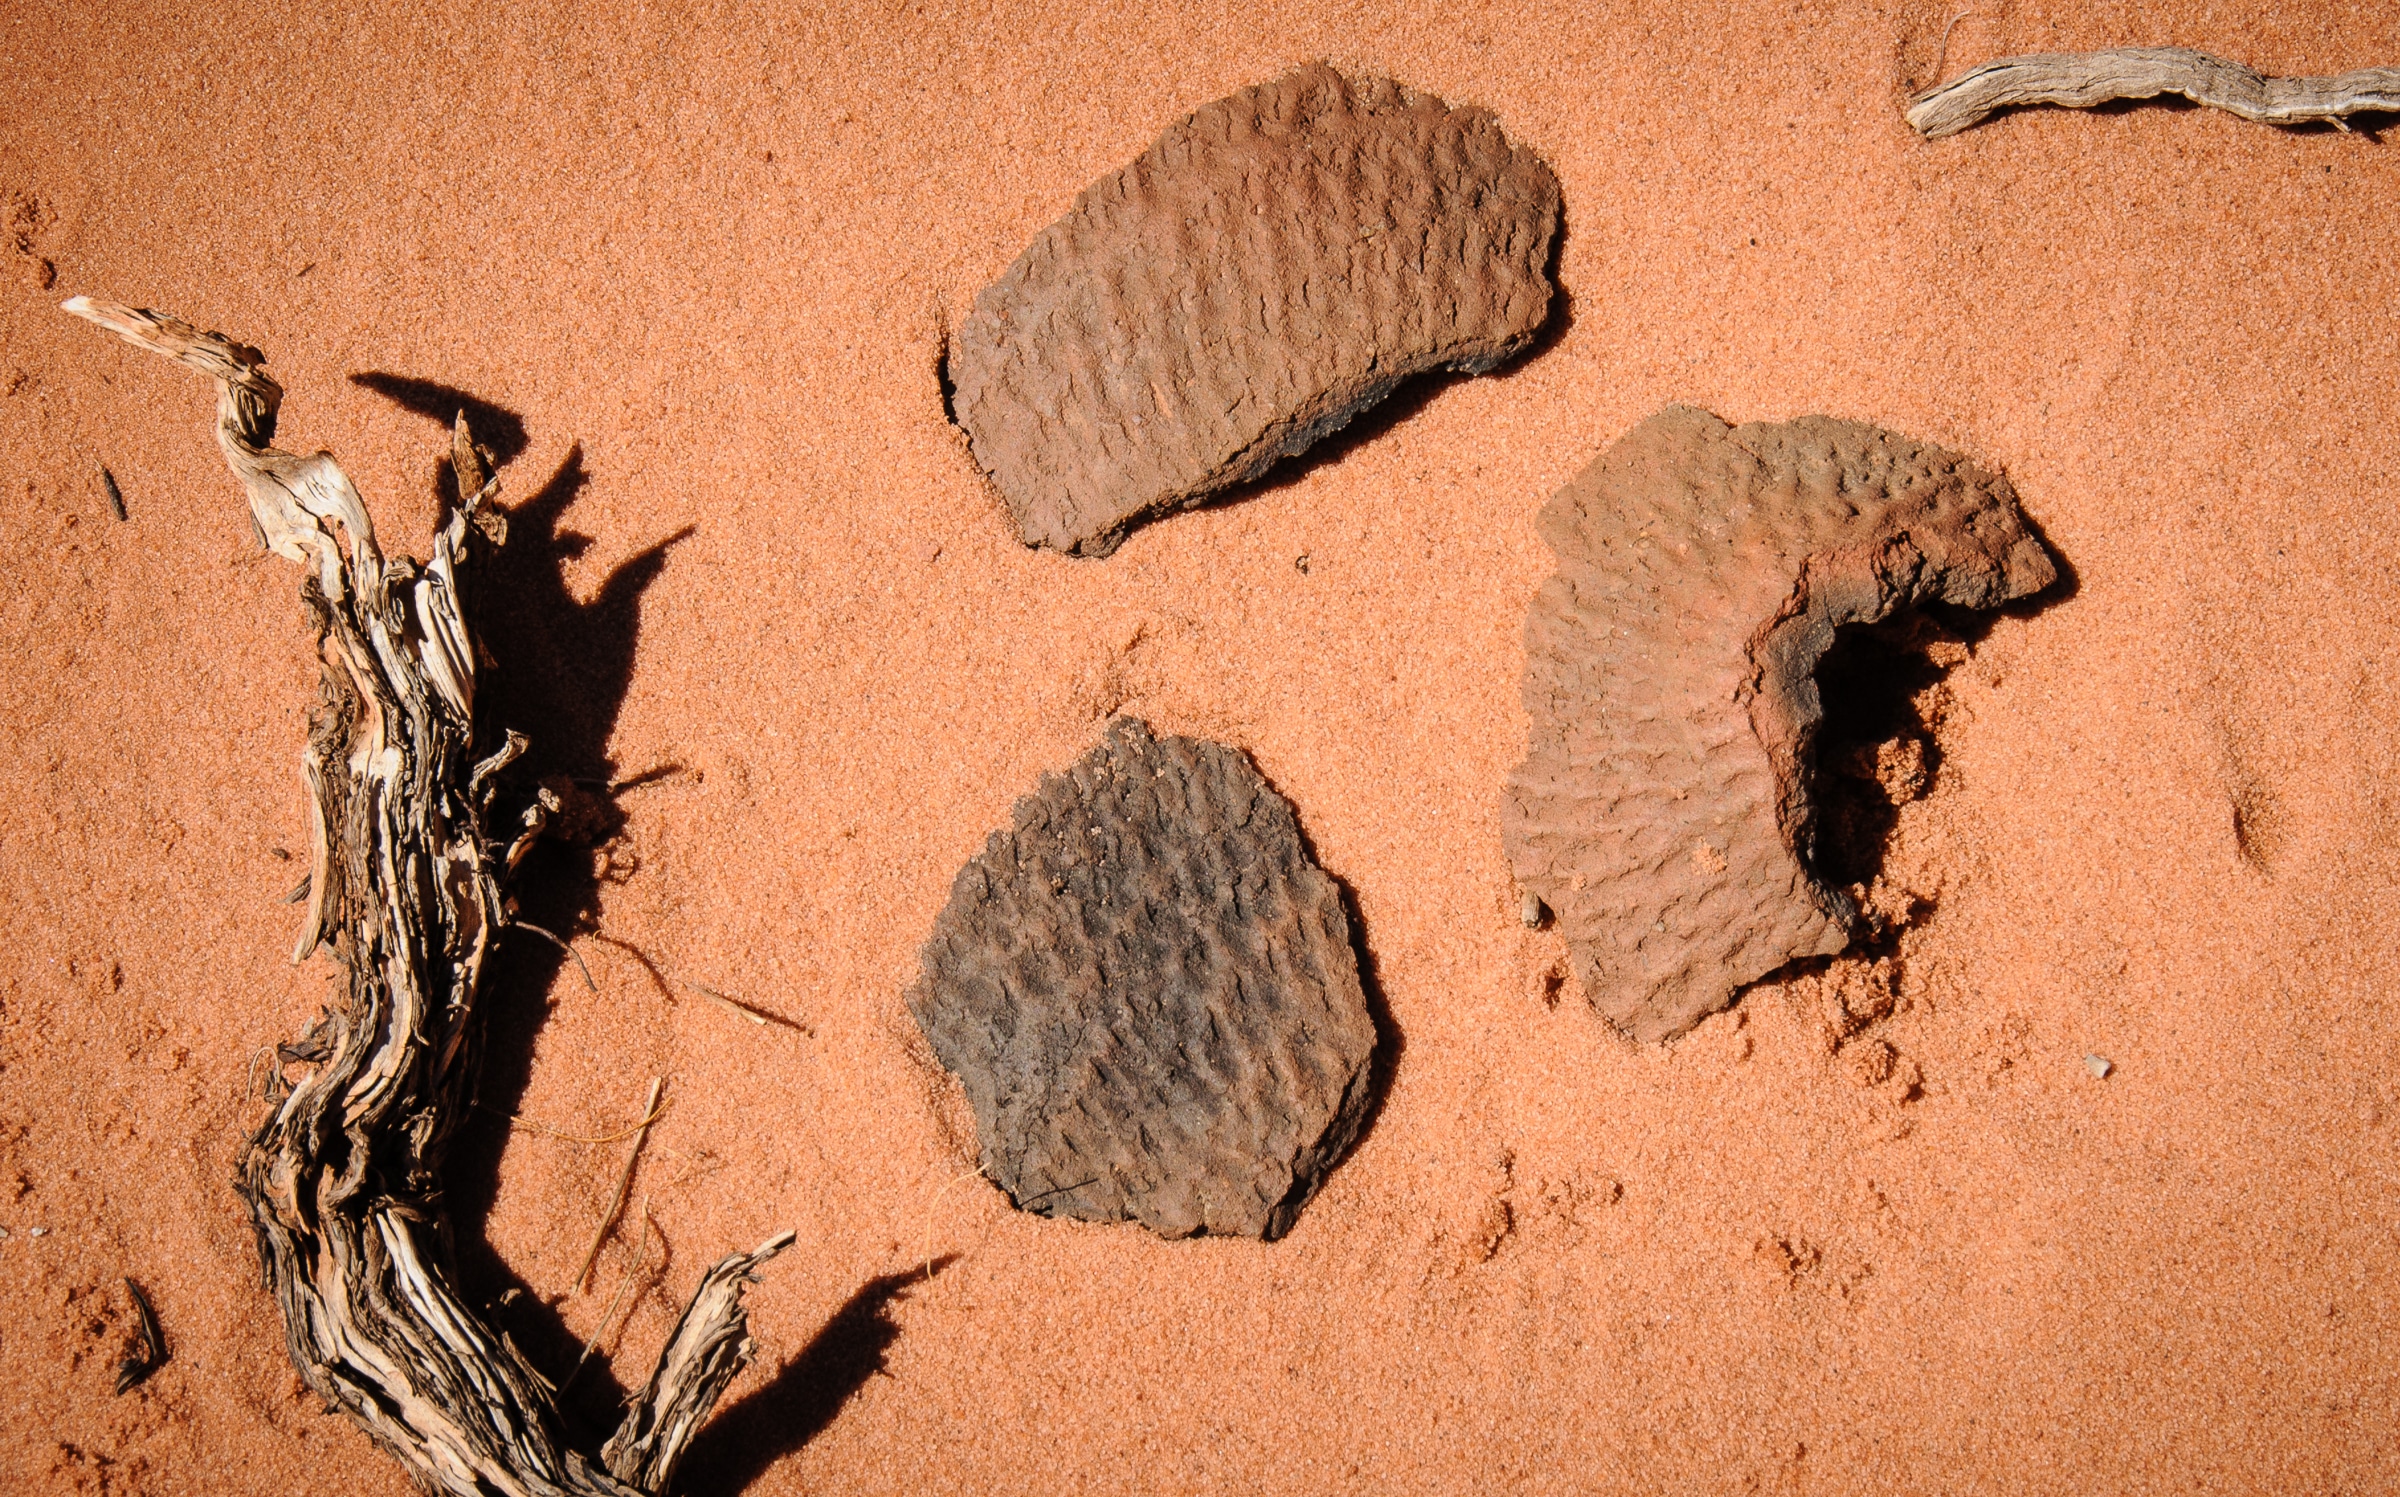 These Anasazi pottery fragments were in the sand next to one of the Paw Hole teepees. They represent the corrugation technique used in early pottery making.